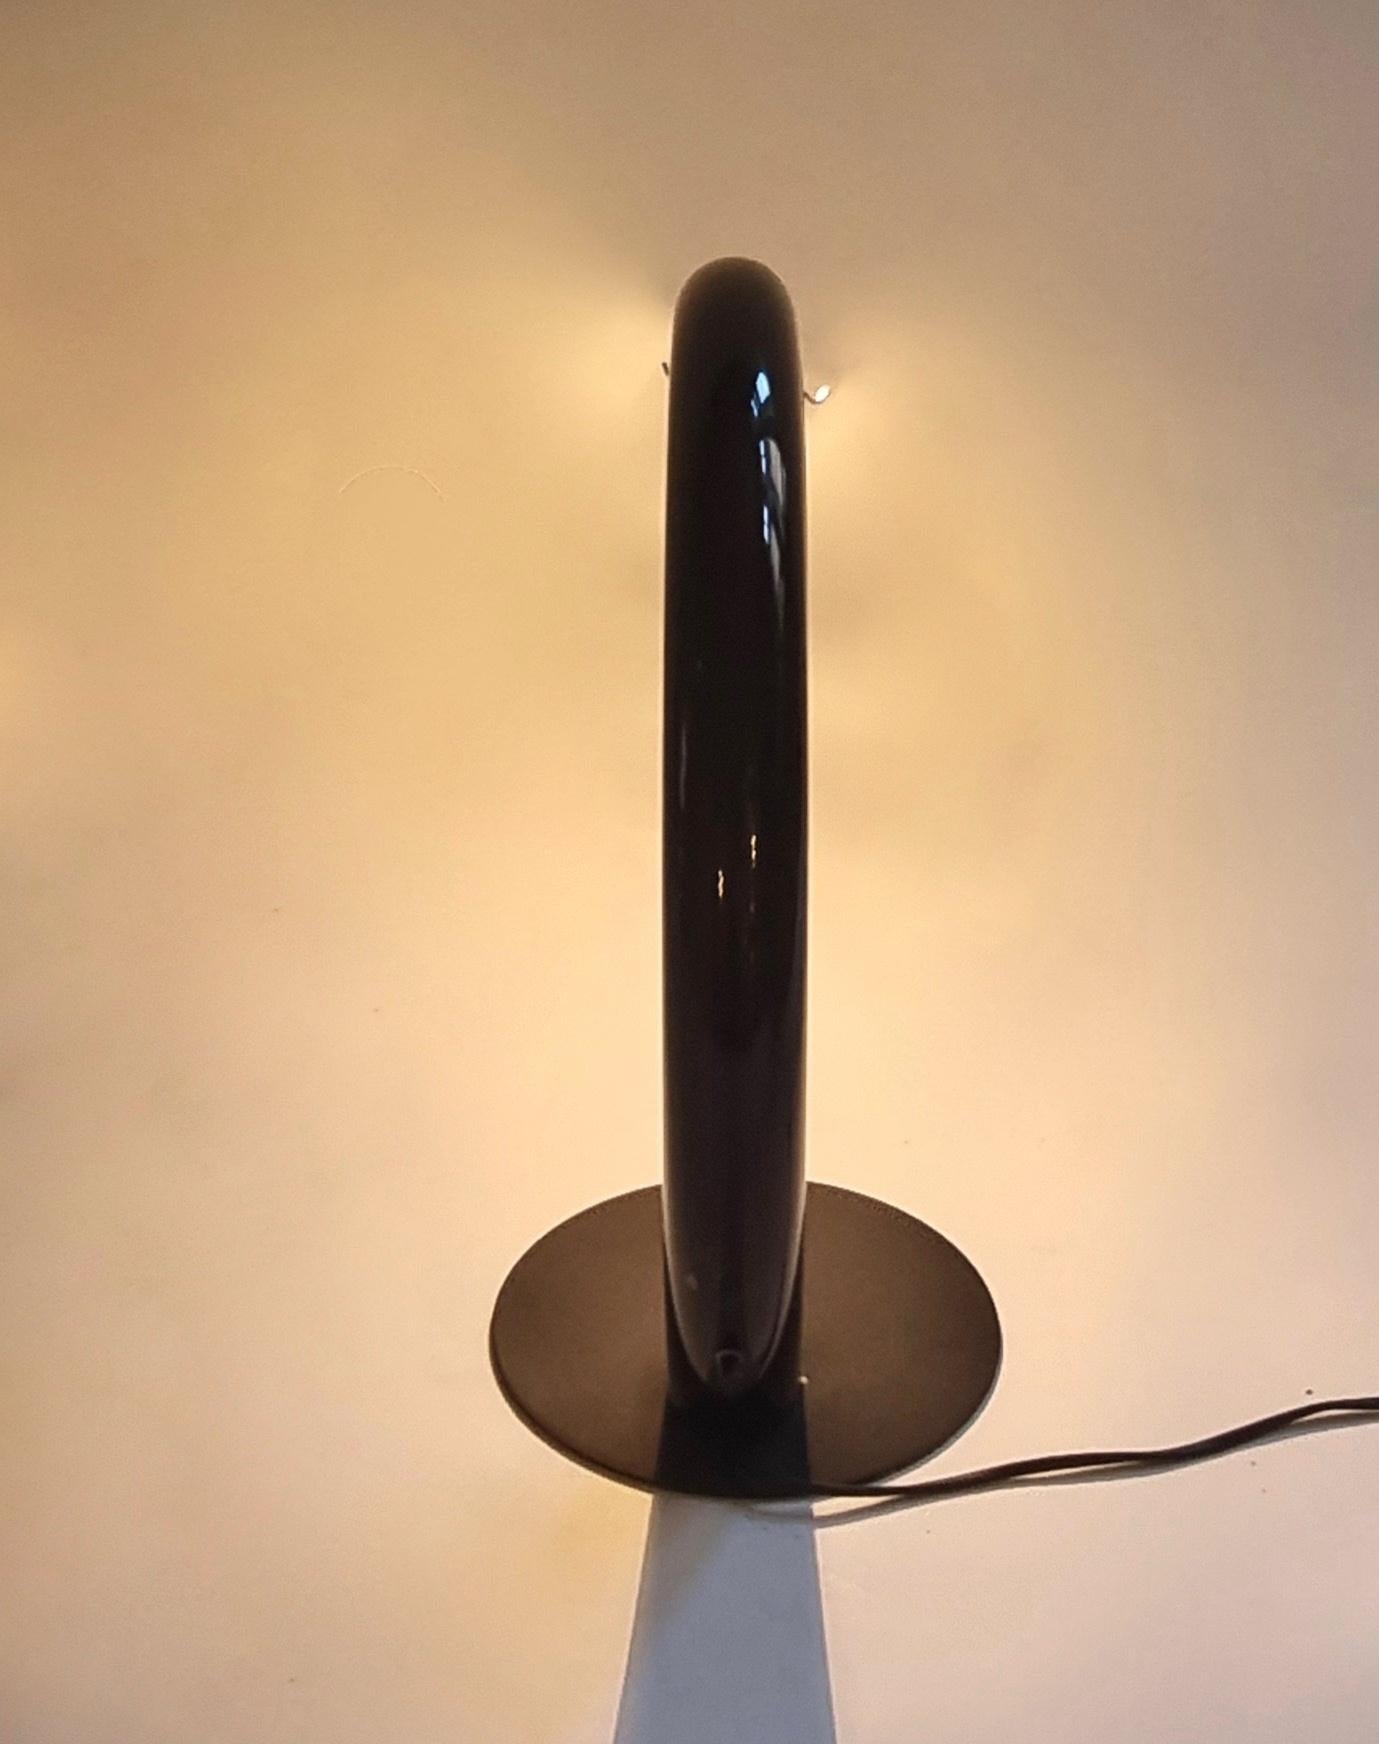 In this listing you may find a gorgeous and extremely rare Mid Century Modern Table Lamp by AVMazzega. The lamp features metal base and glass arc shade done in black Murano glass. Its minimalist design makes this piece very elegant and timeless.